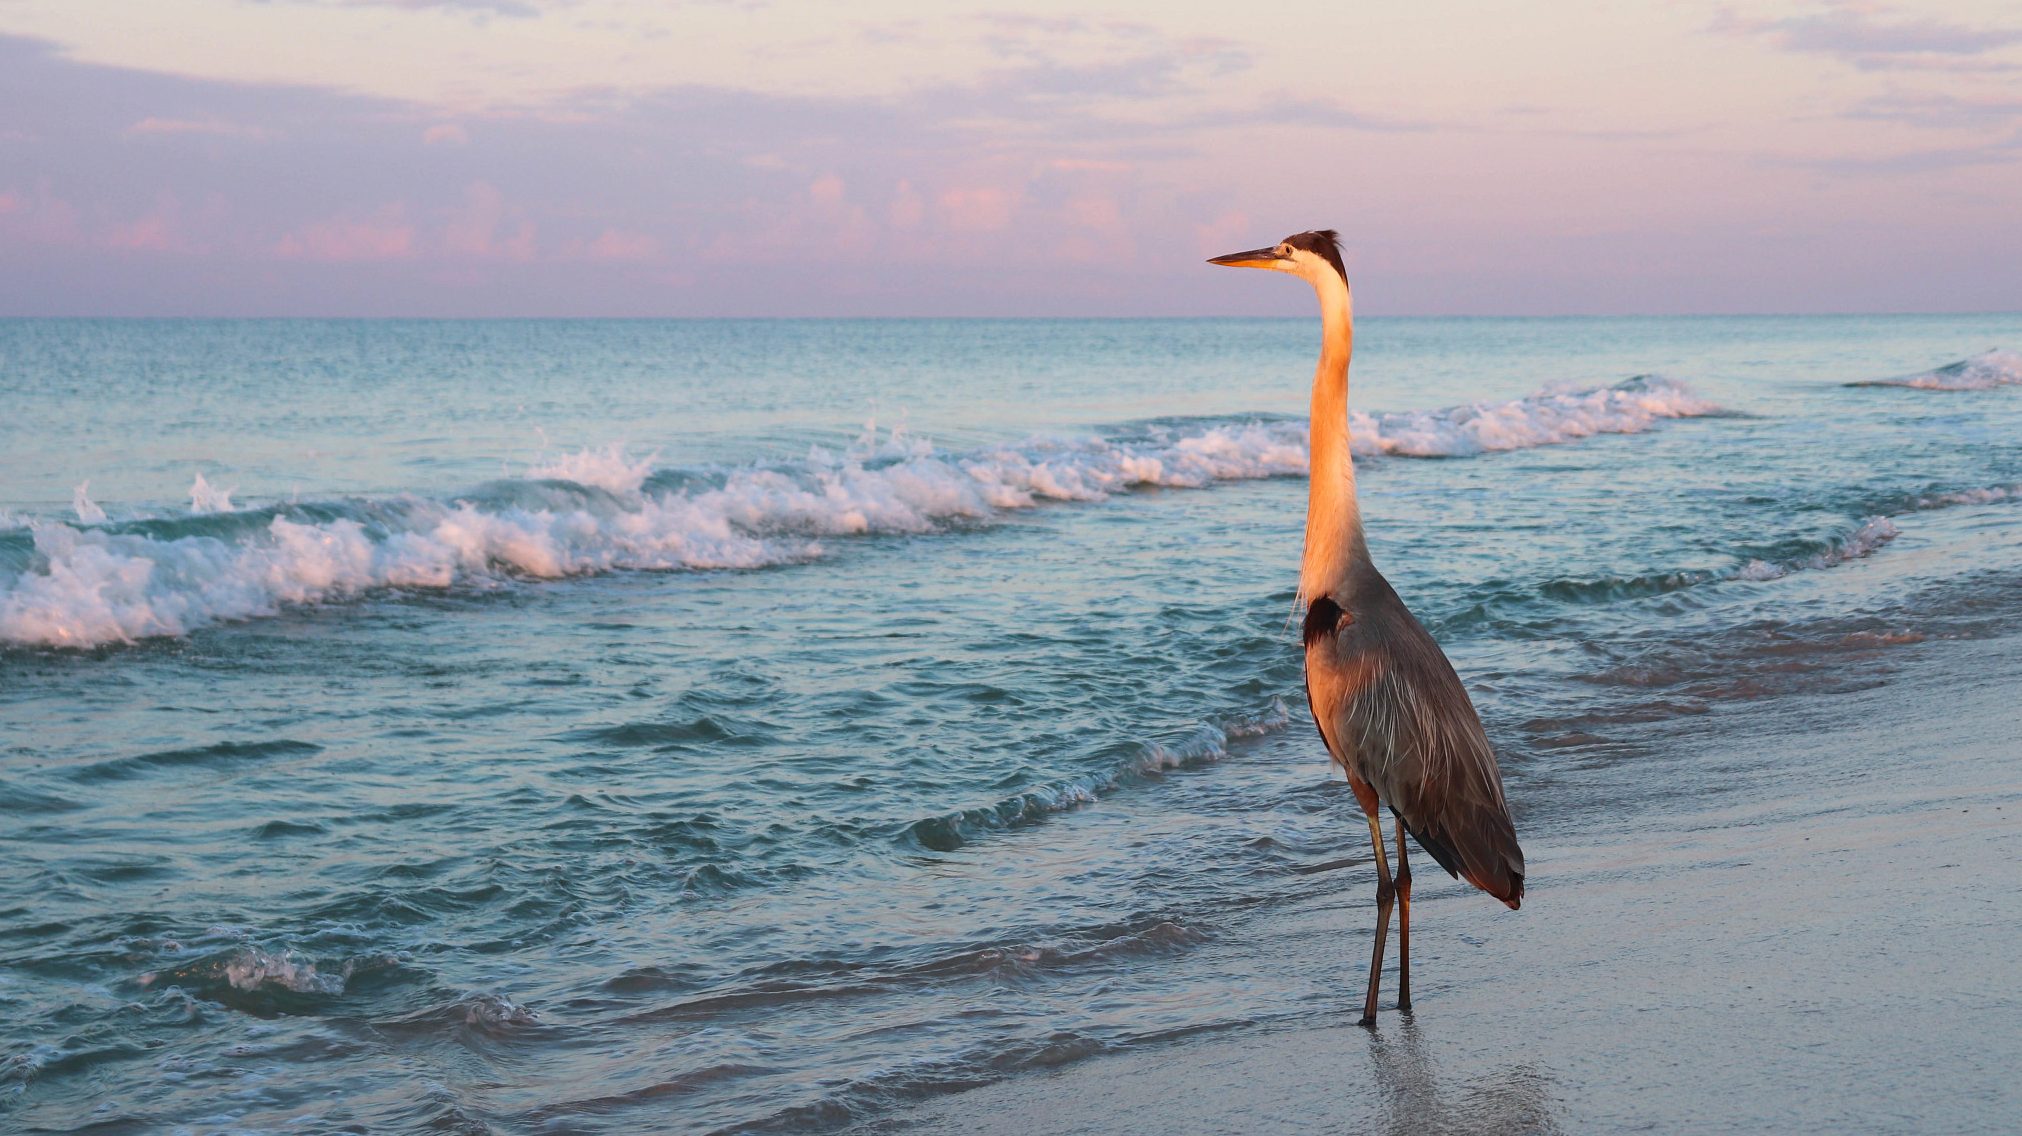 Image of heron standing on shore